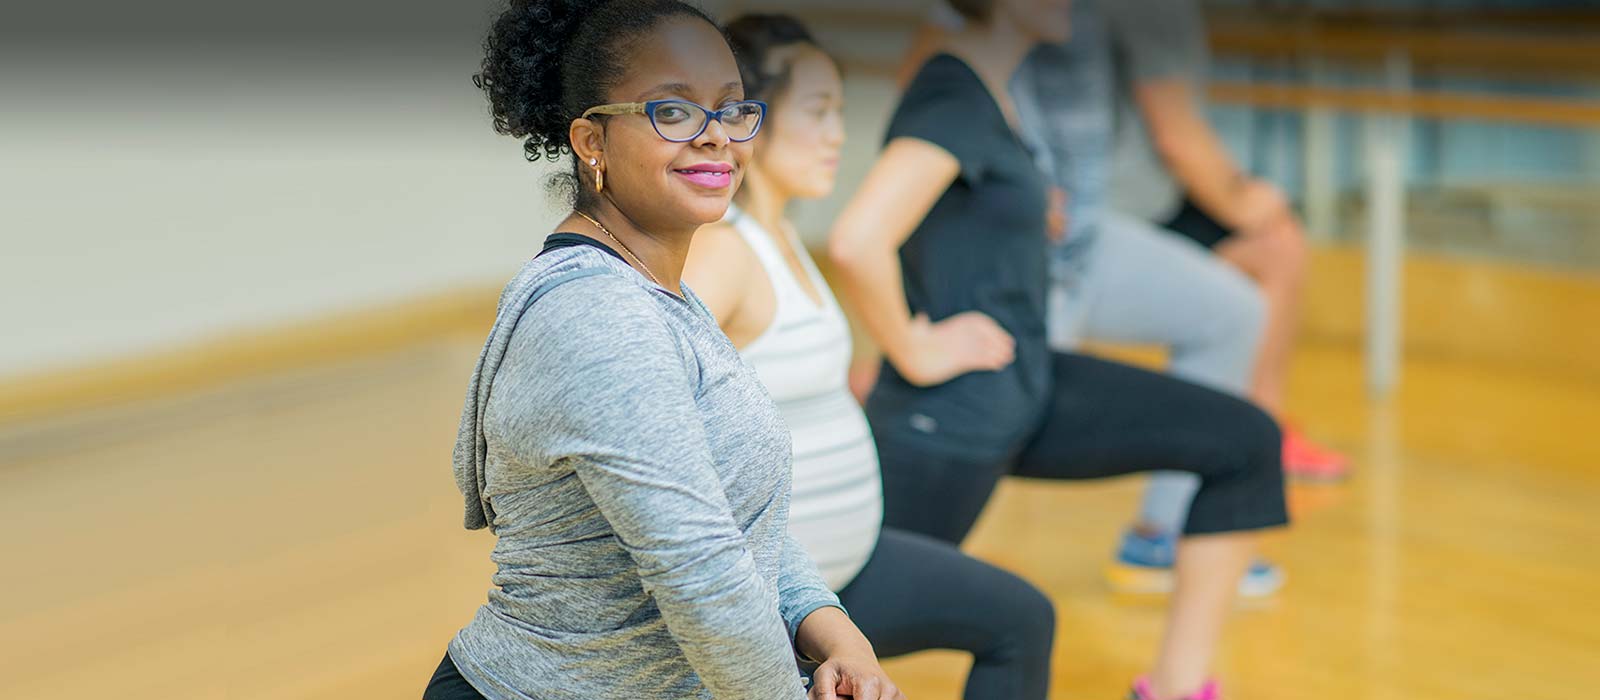 Pregnant  women in fitness class